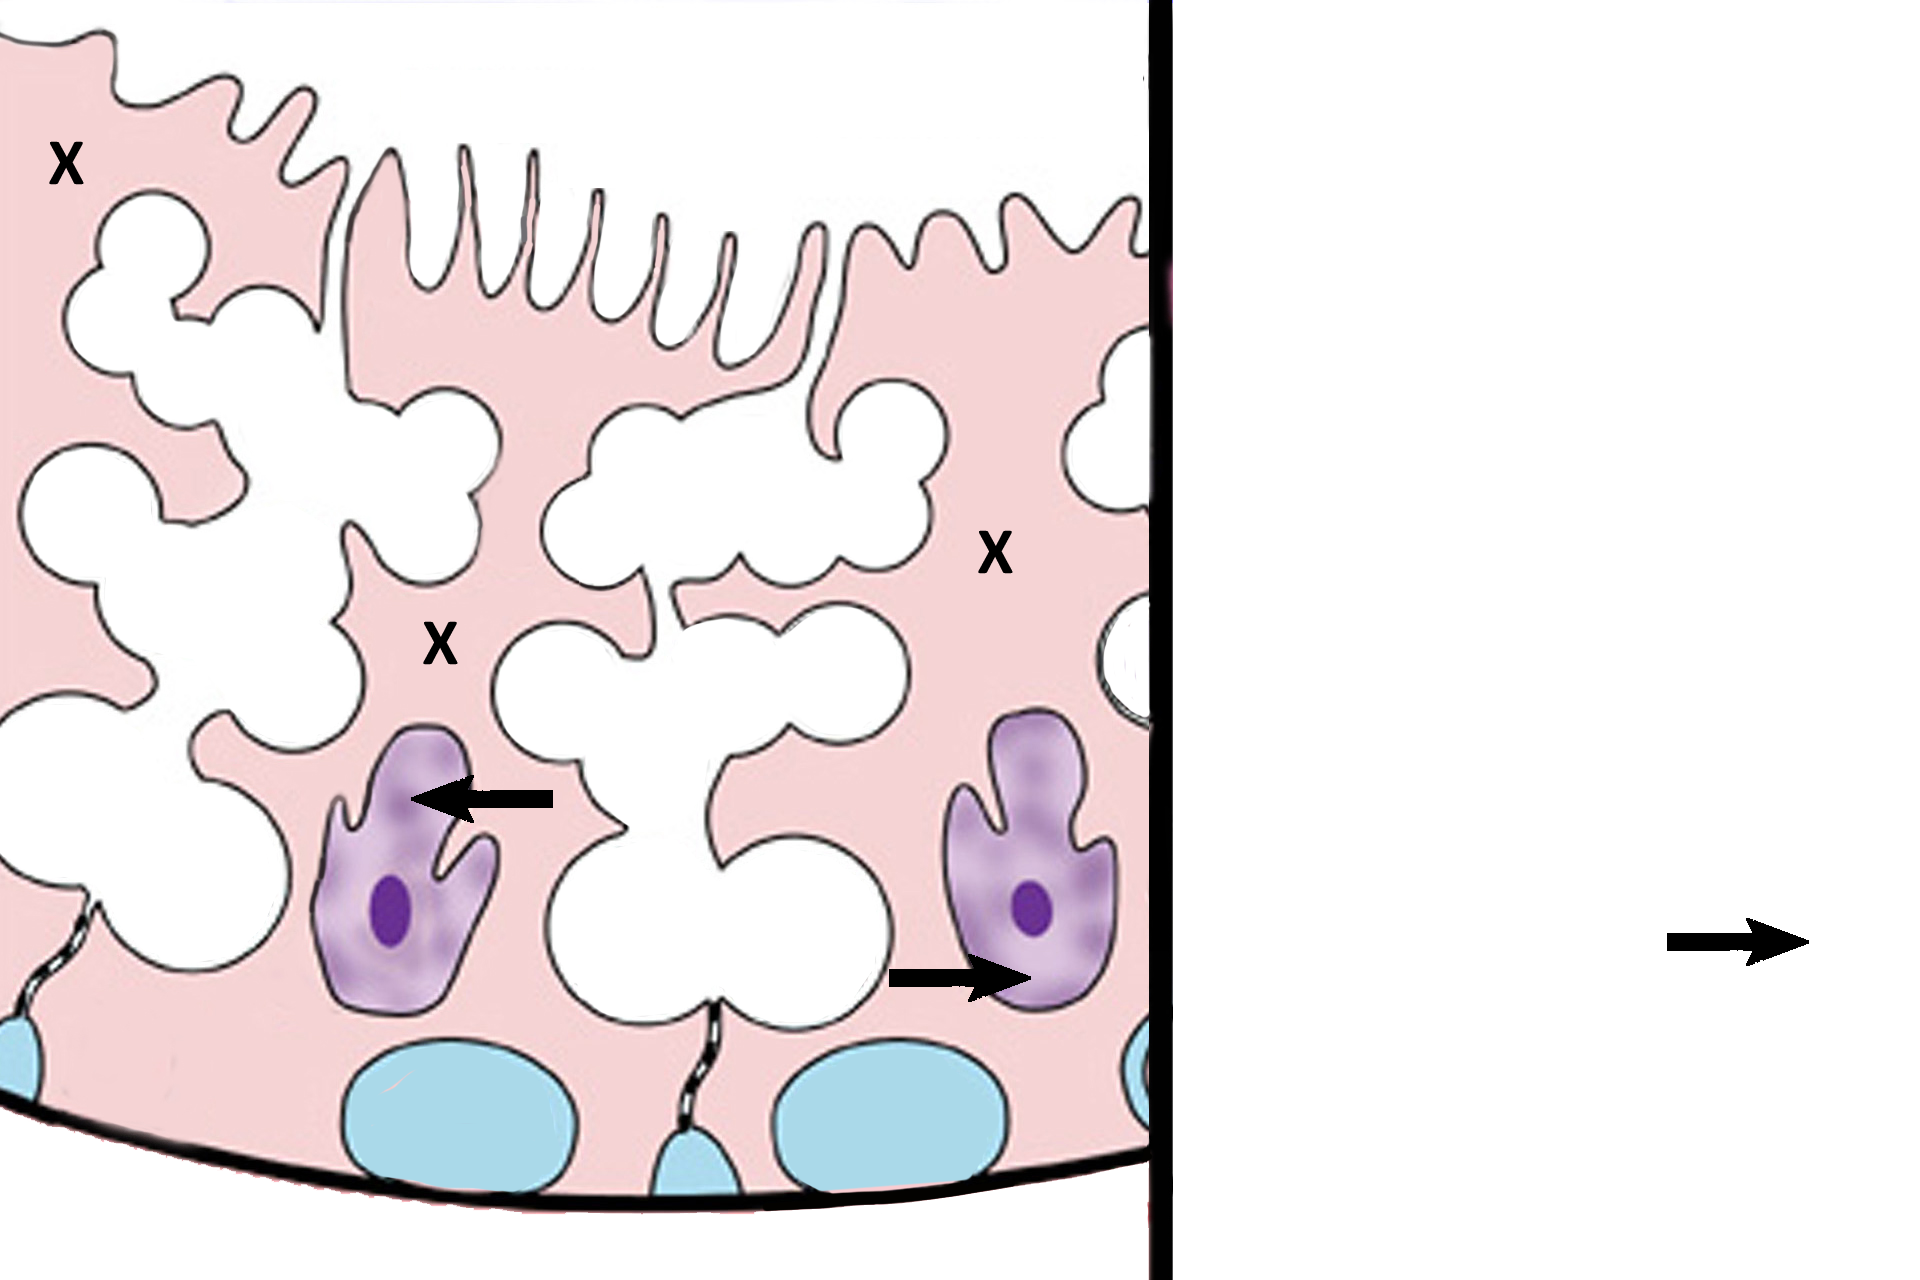 Sertoli cells > <p>Sertoli cells (X) extend from the basal lamina to the lumen. Their nuclei (arrows) are ovoid, have a prominent nucleolus, are usually indented, and lie perpendicular to the basal lamina. Sertoli cells extend numerous lateral processes that “bear hug” developing germ cells and form occluding junctions with adjacent Sertoli cells. These occluding junctions establish the blood-testis barrier.</p>
